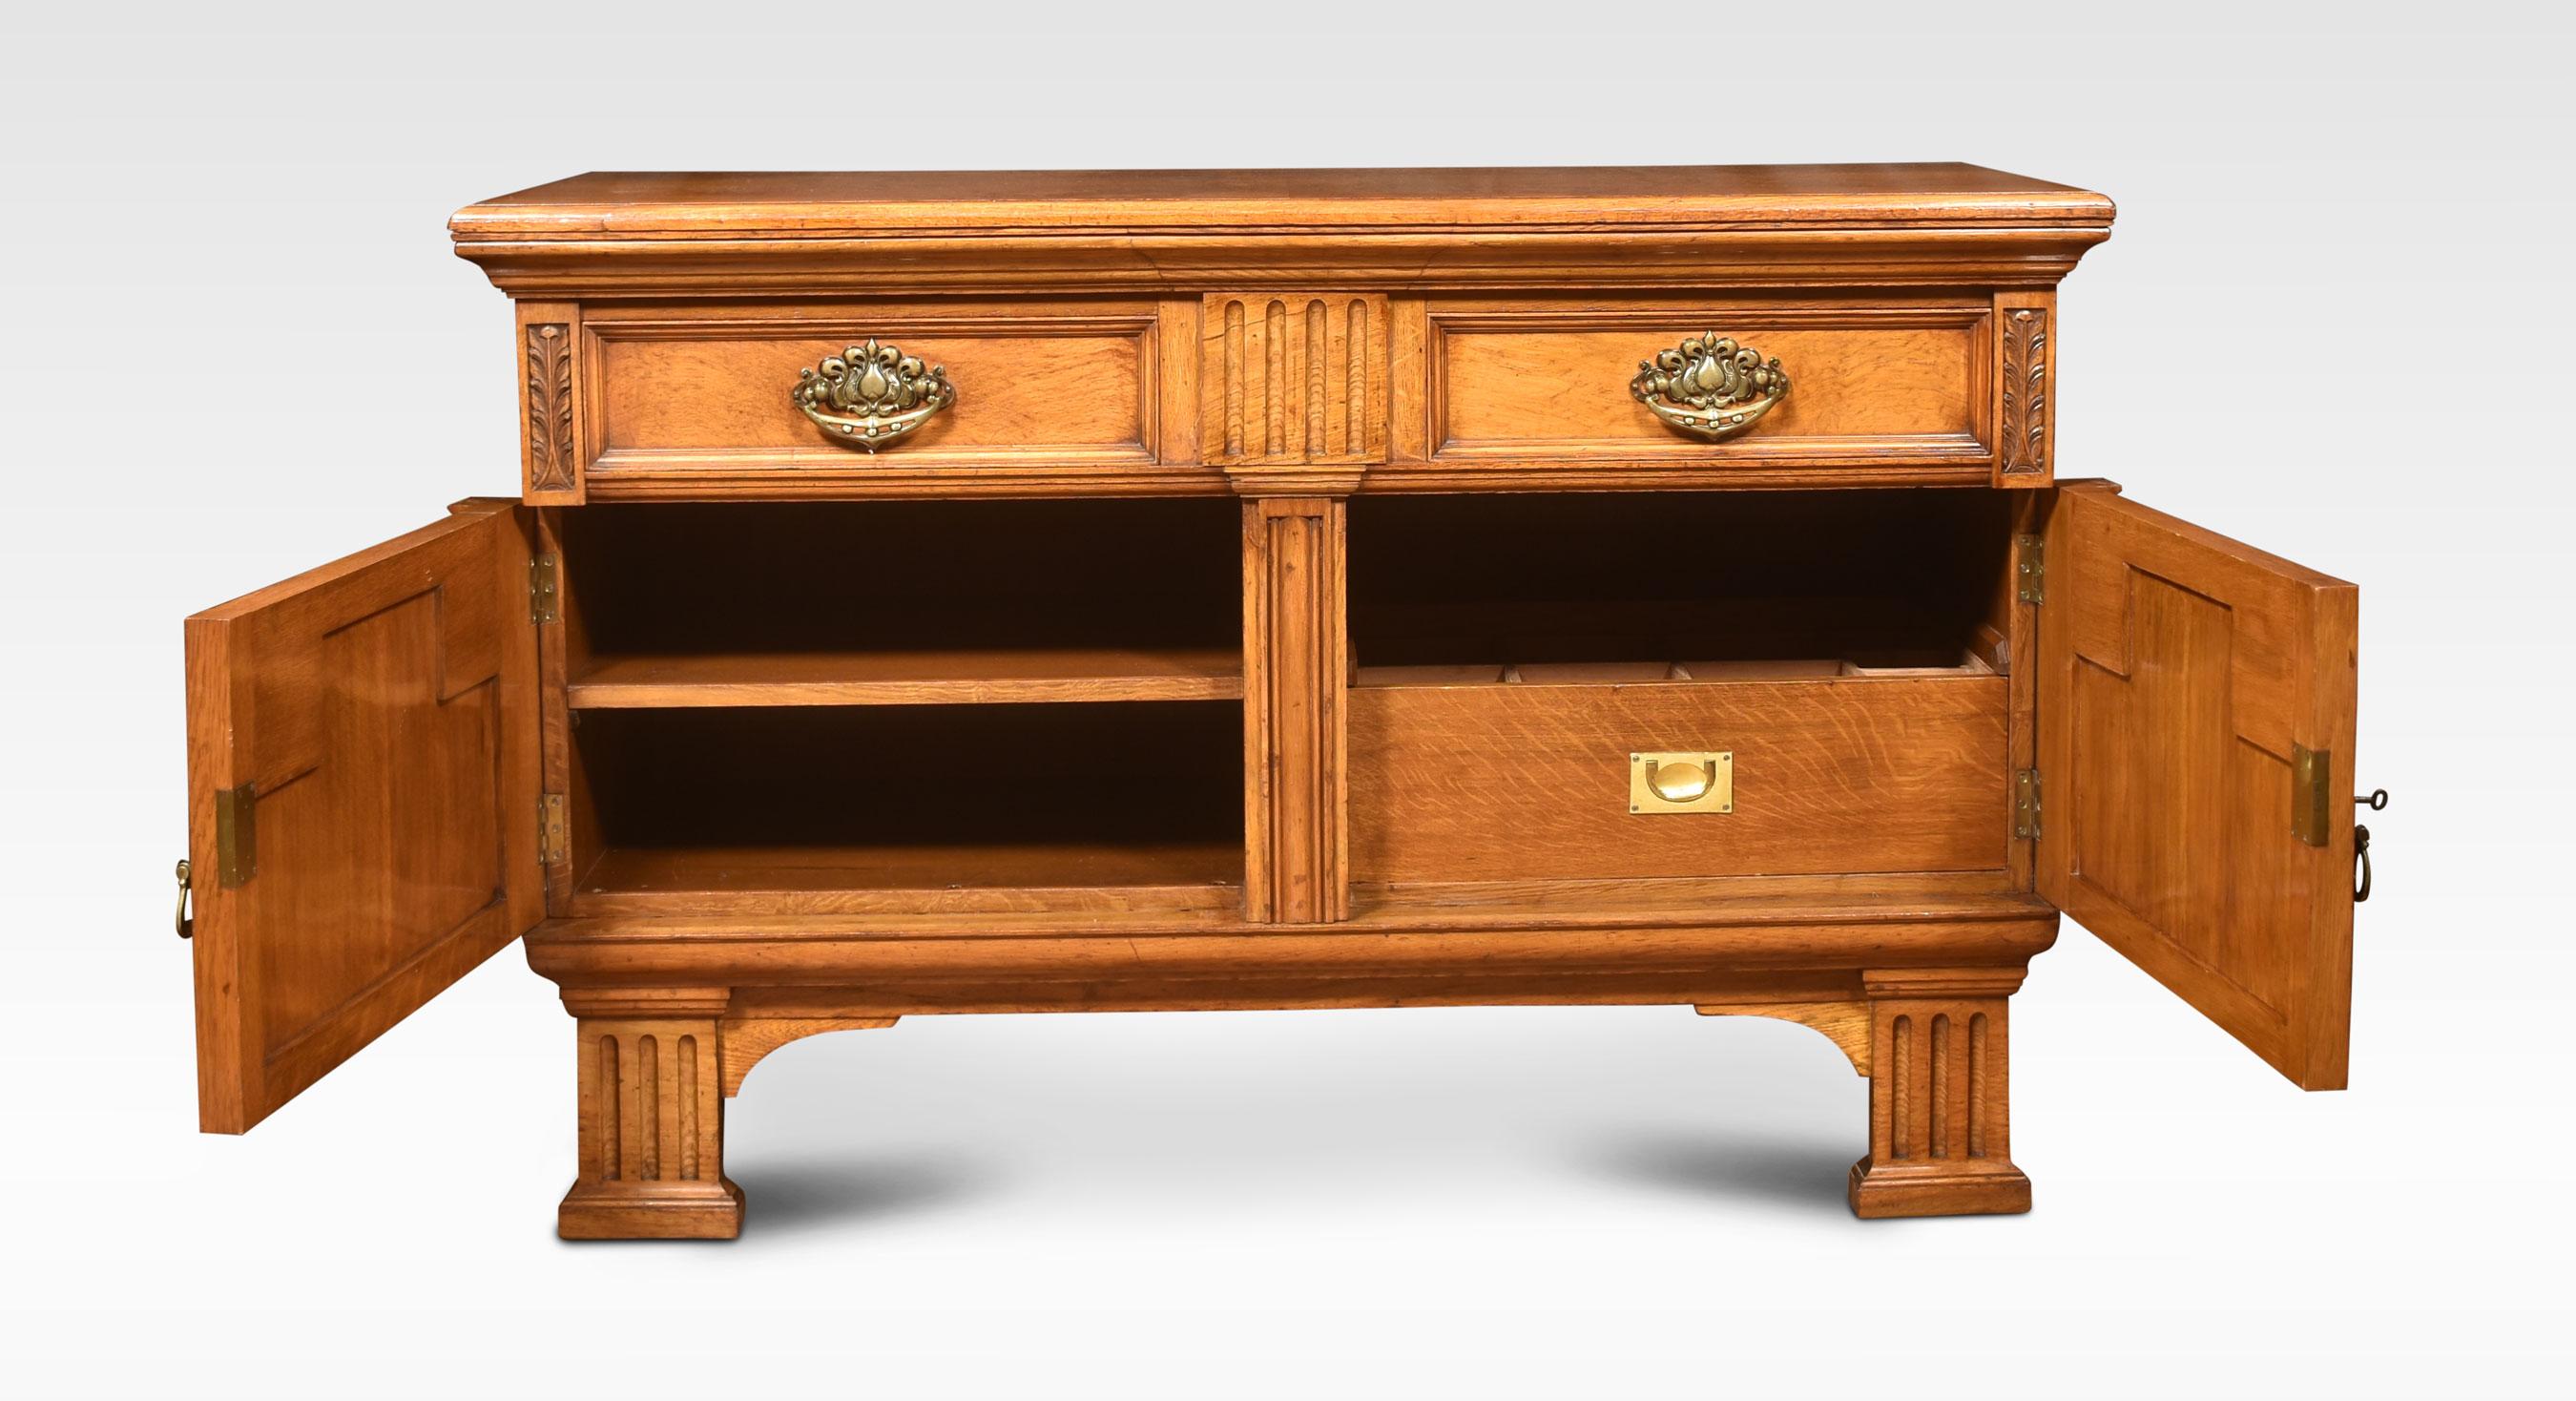 19th Centuary sideboard, the large rectangular pollard oak top above two frieze drawers with bold tooled brass handles. Above a pair of panelled doors with crisp carved detail, openeing to reveal shelving and a cellaret. All raised up on reeded